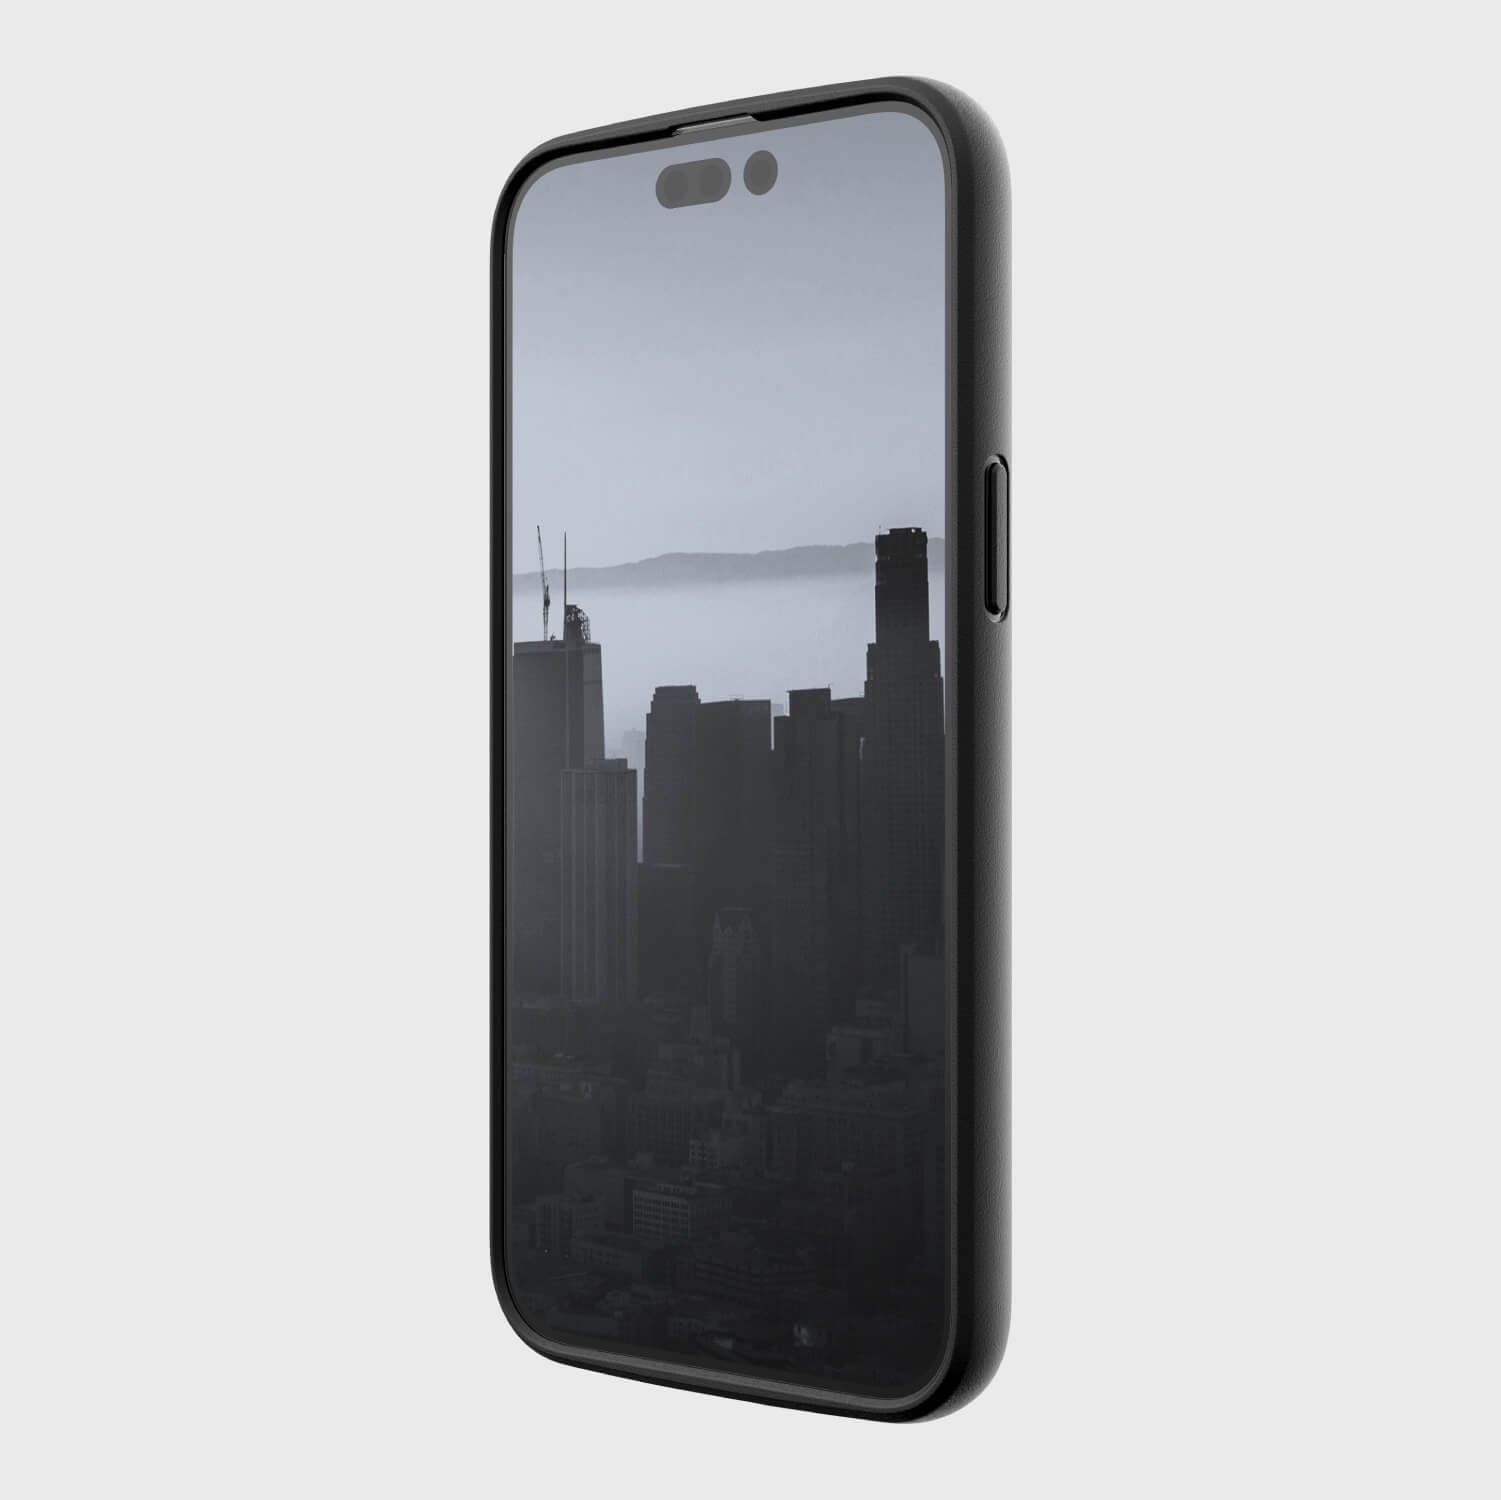 An environmentally friendly Raptic black phone with a slim Raptic case and a view of a city.